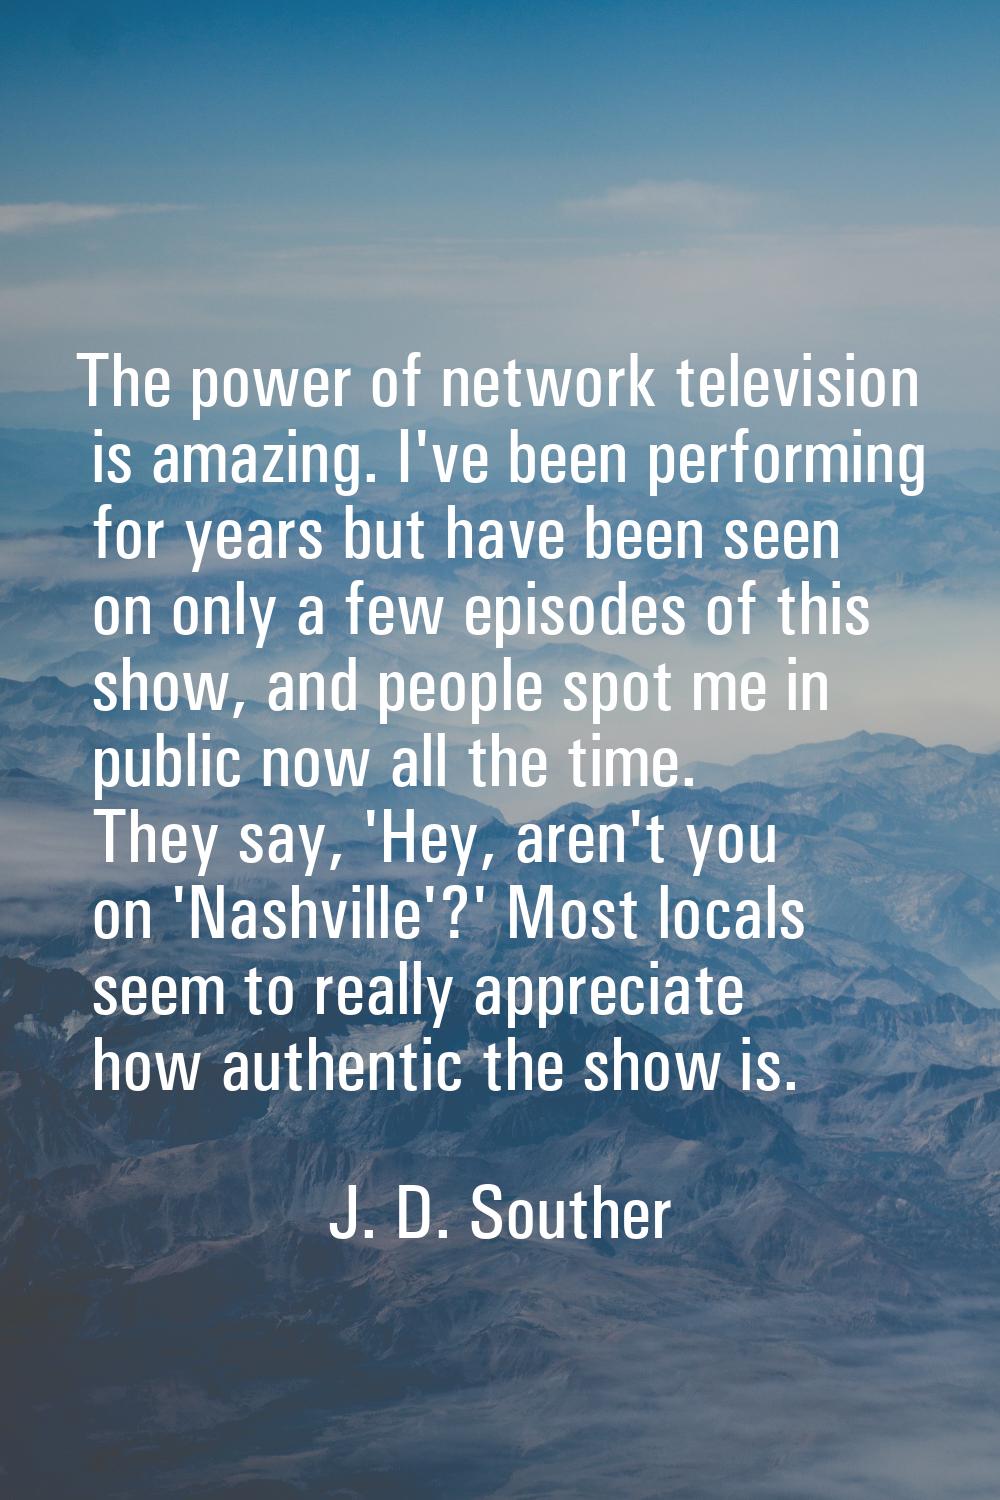 The power of network television is amazing. I've been performing for years but have been seen on on